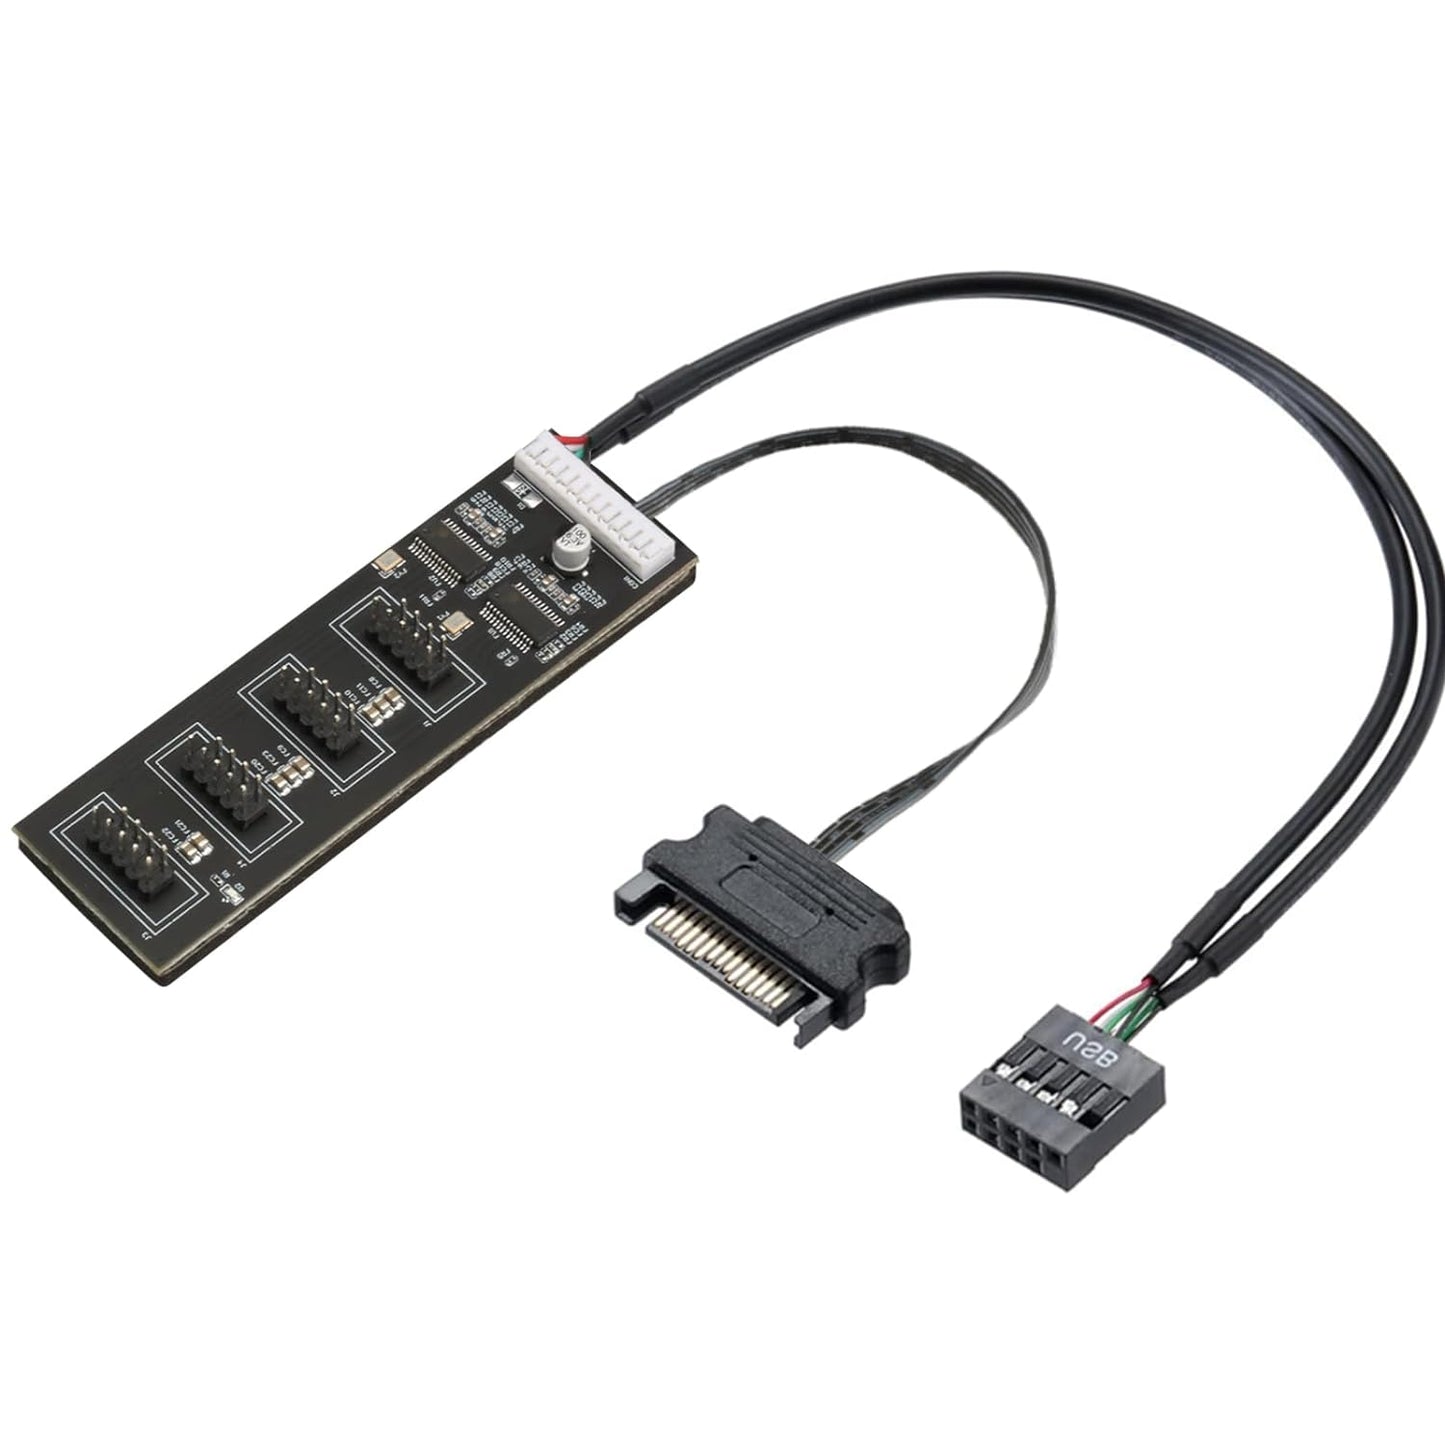 USB Header Splitter with SATA Power Cable